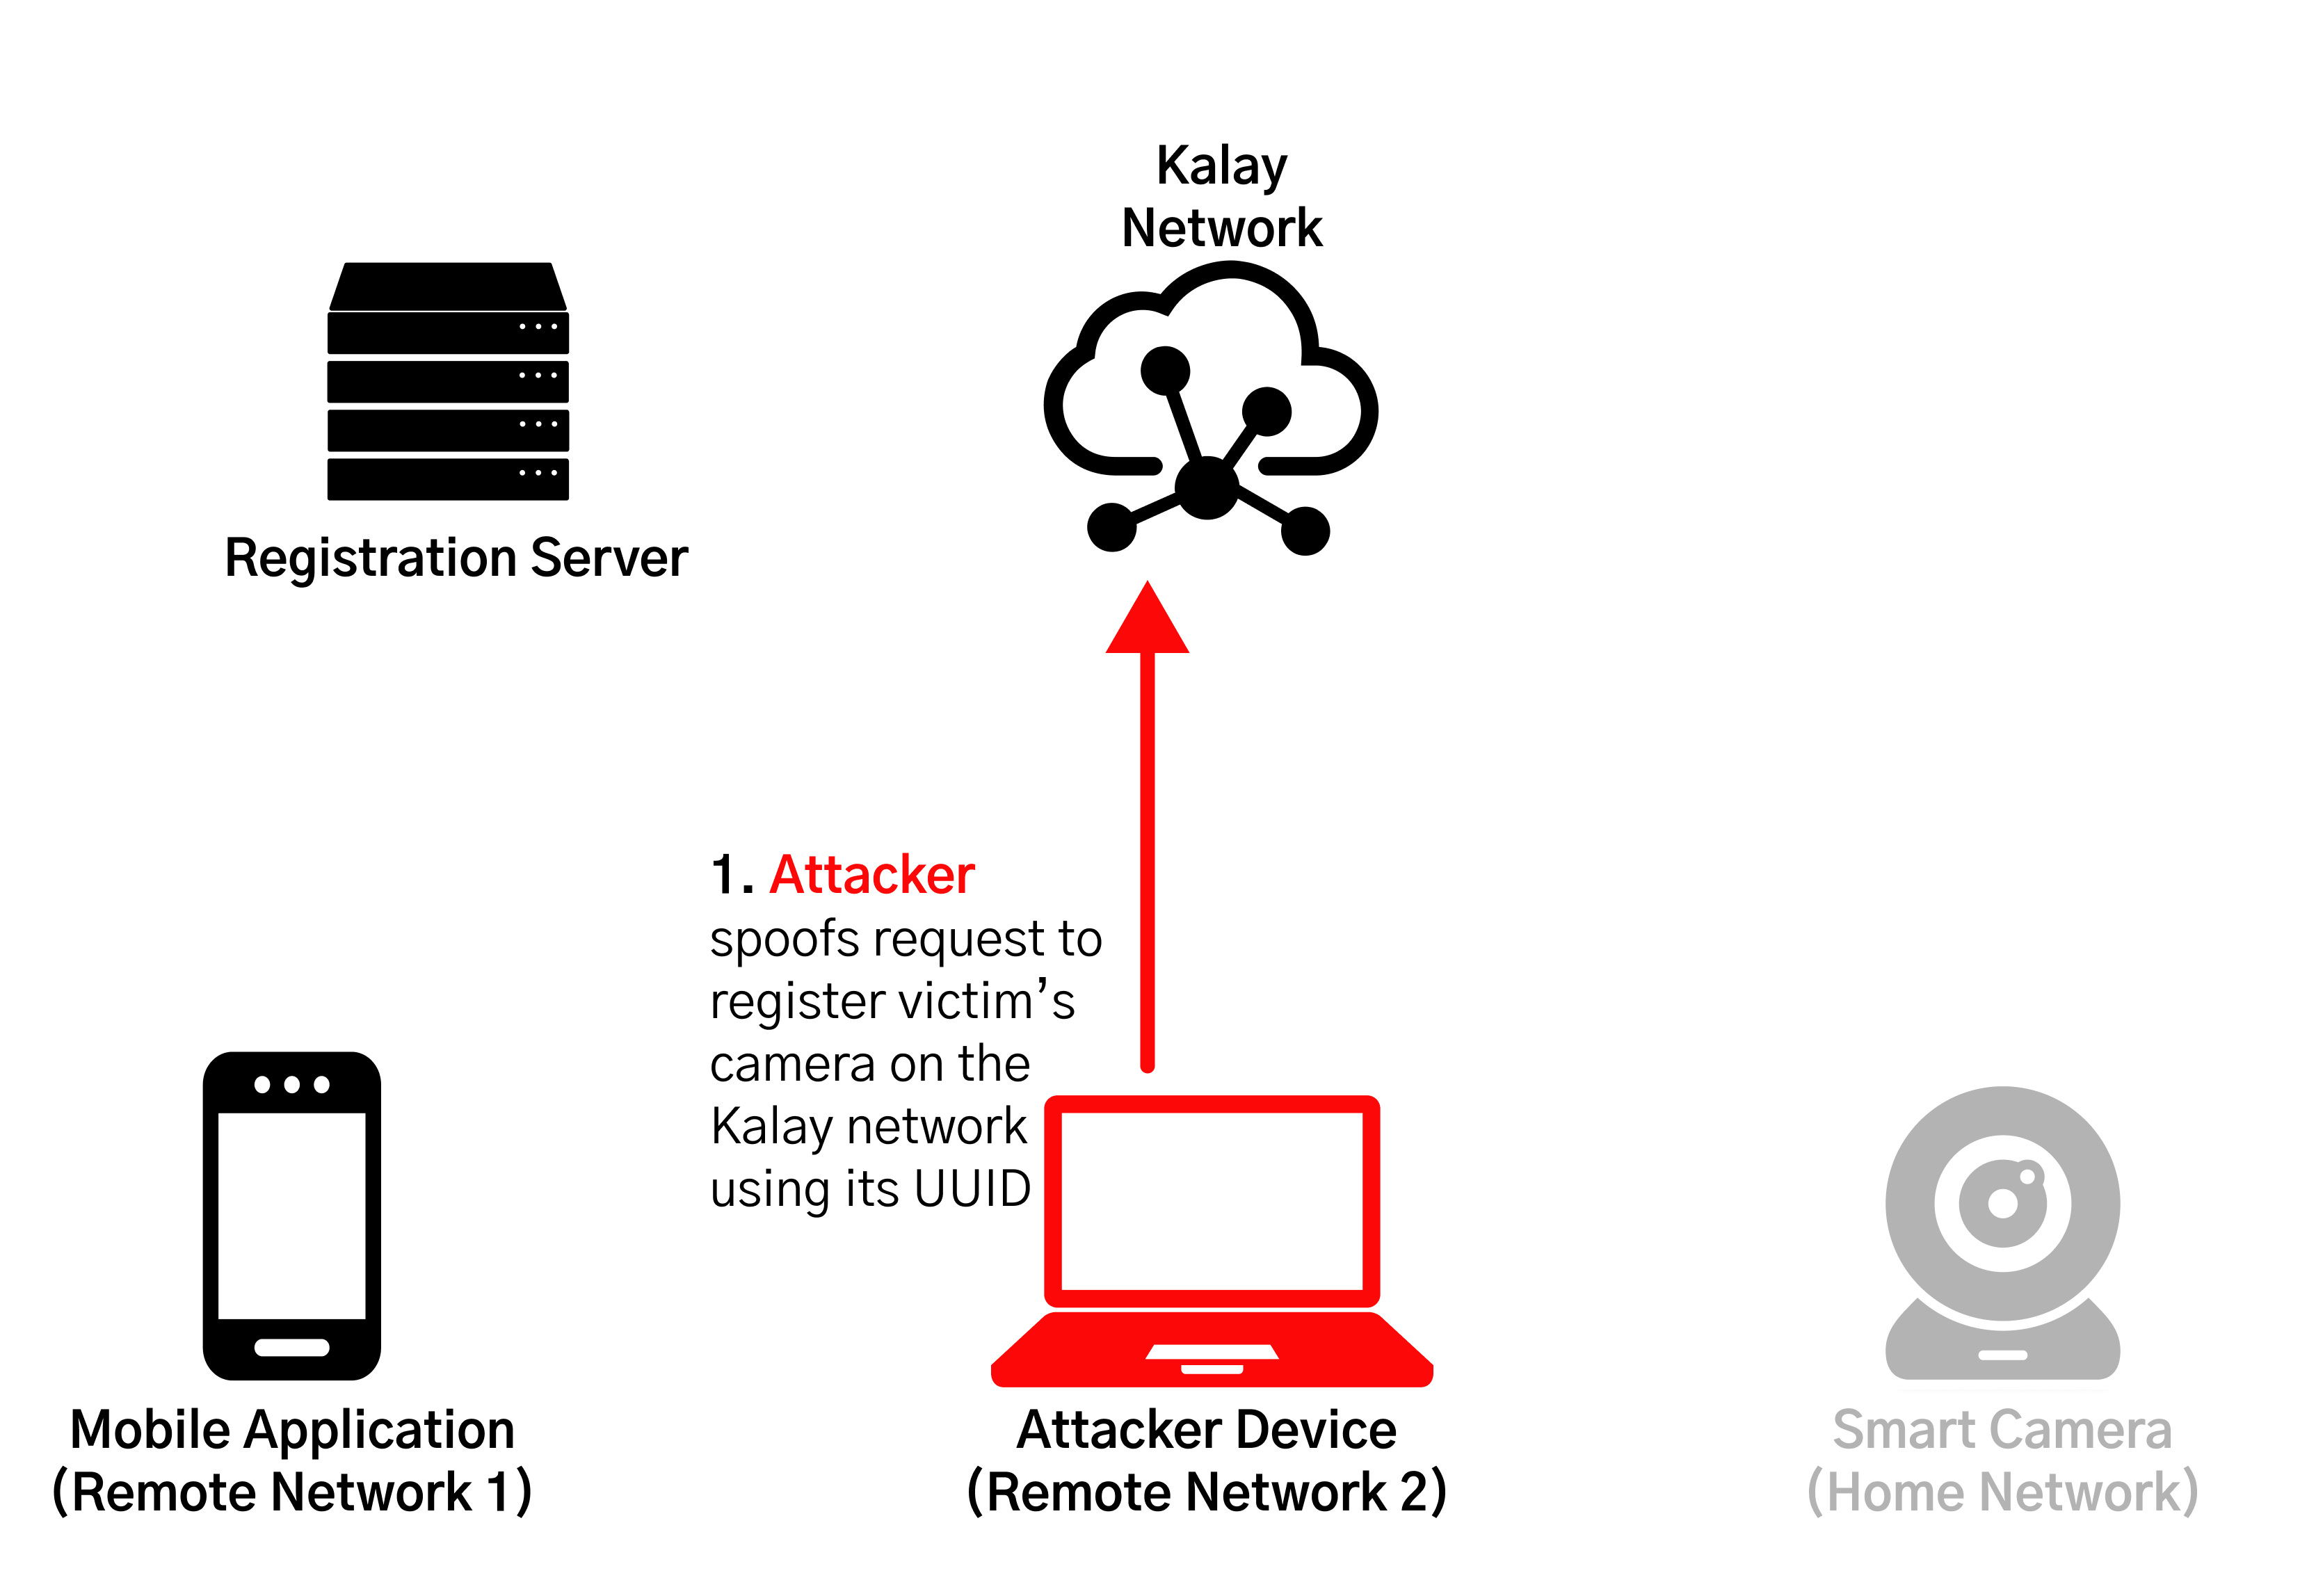 Attacker exploiting device personation vulnerability to capture credentials